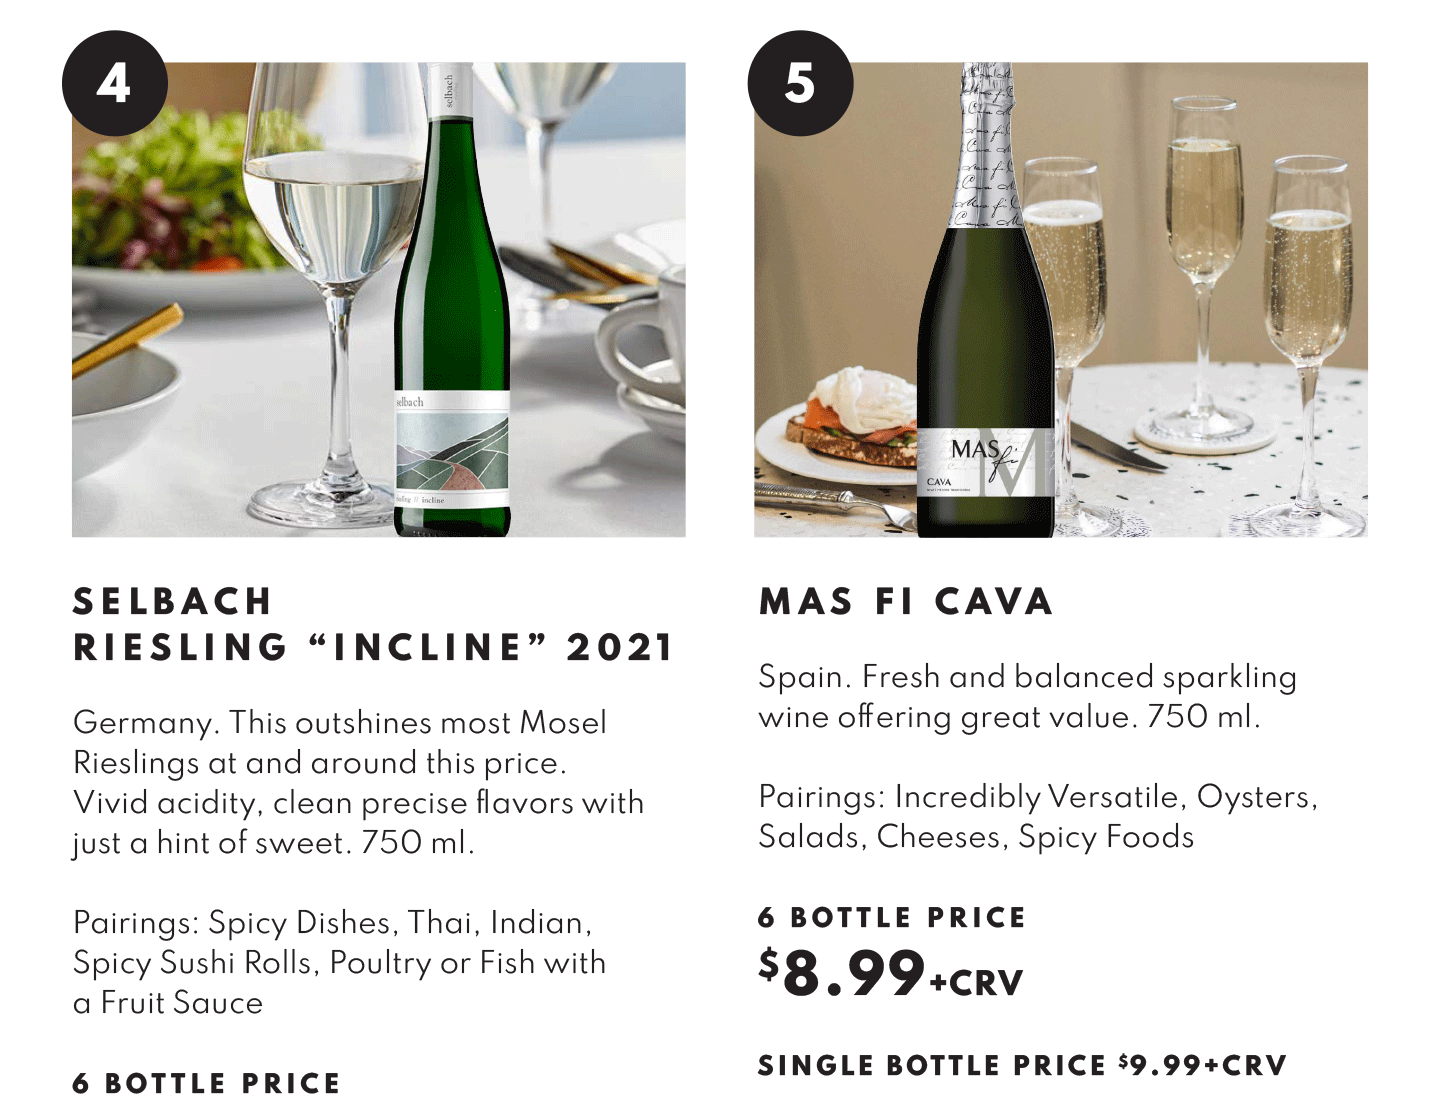 Selbach Riesling "Incline" 2021 - $11.69, 6 bottle price and Mas Fi Cava $8.99, 6 bottle price